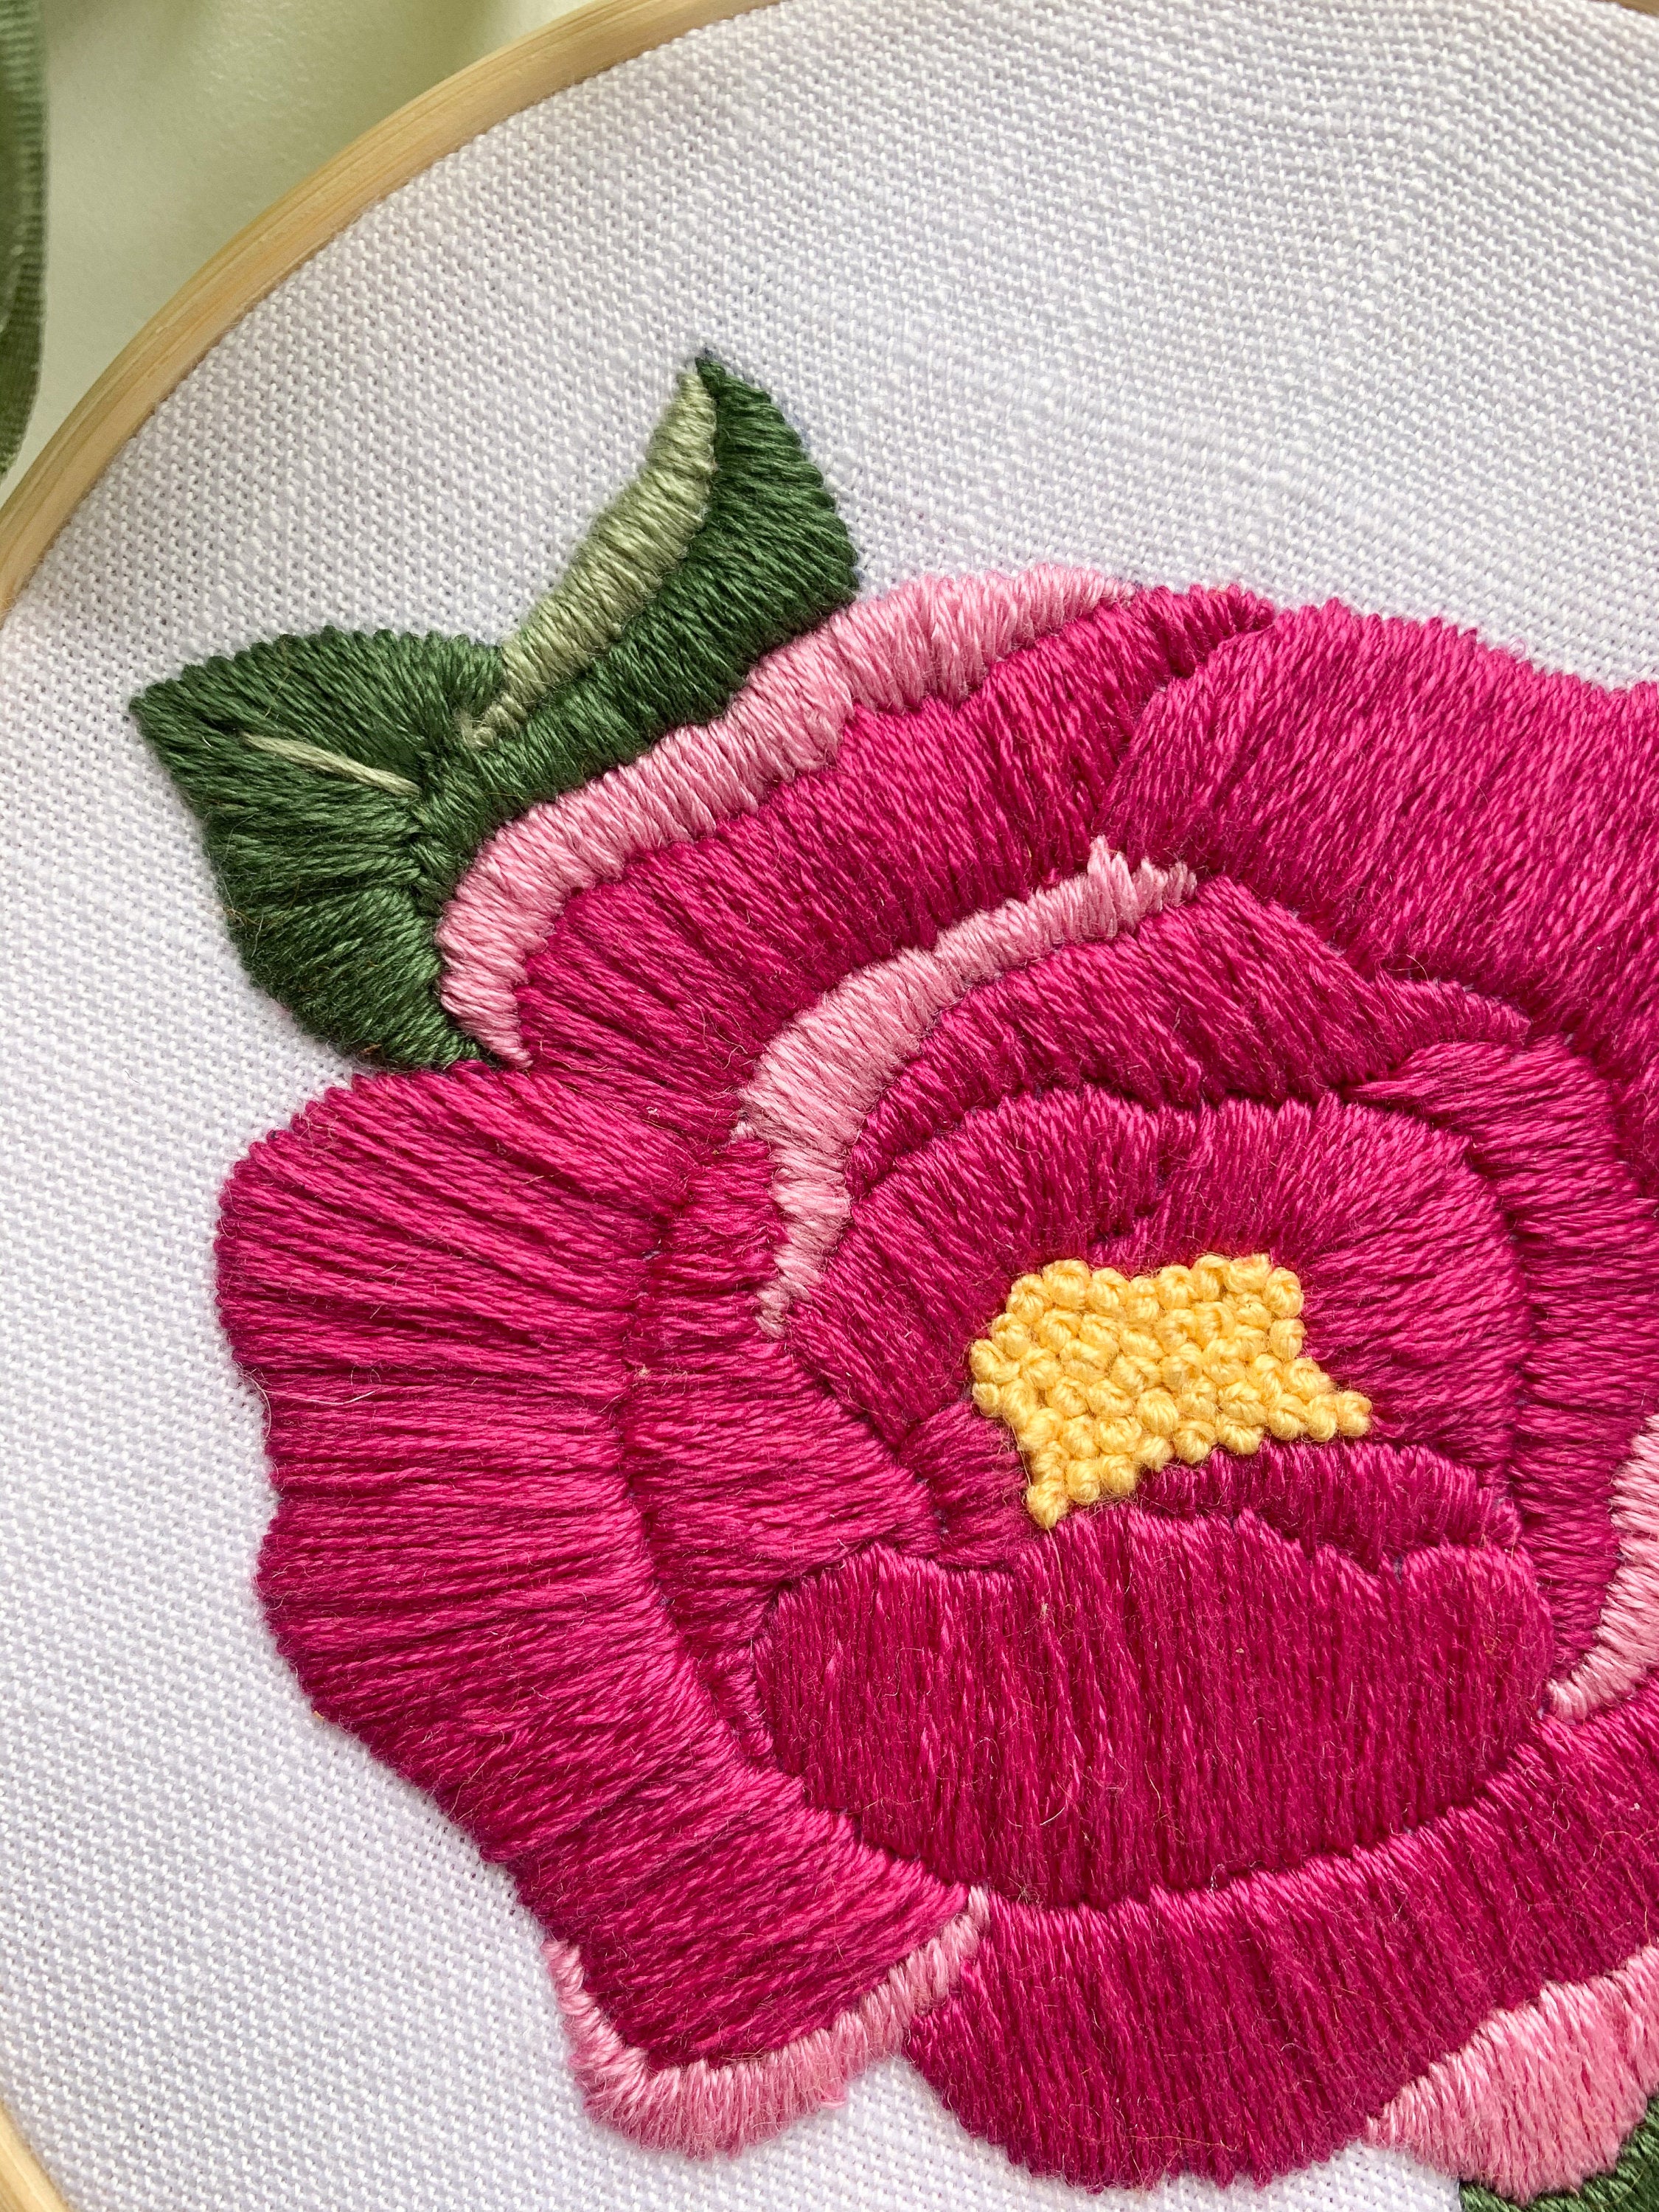 Pink Lily Hand Embroidery PDF Pattern, Spring Floral Needle-painting,  Botanical DIY Embroidery, Flower Embroidery Pattern -  Canada